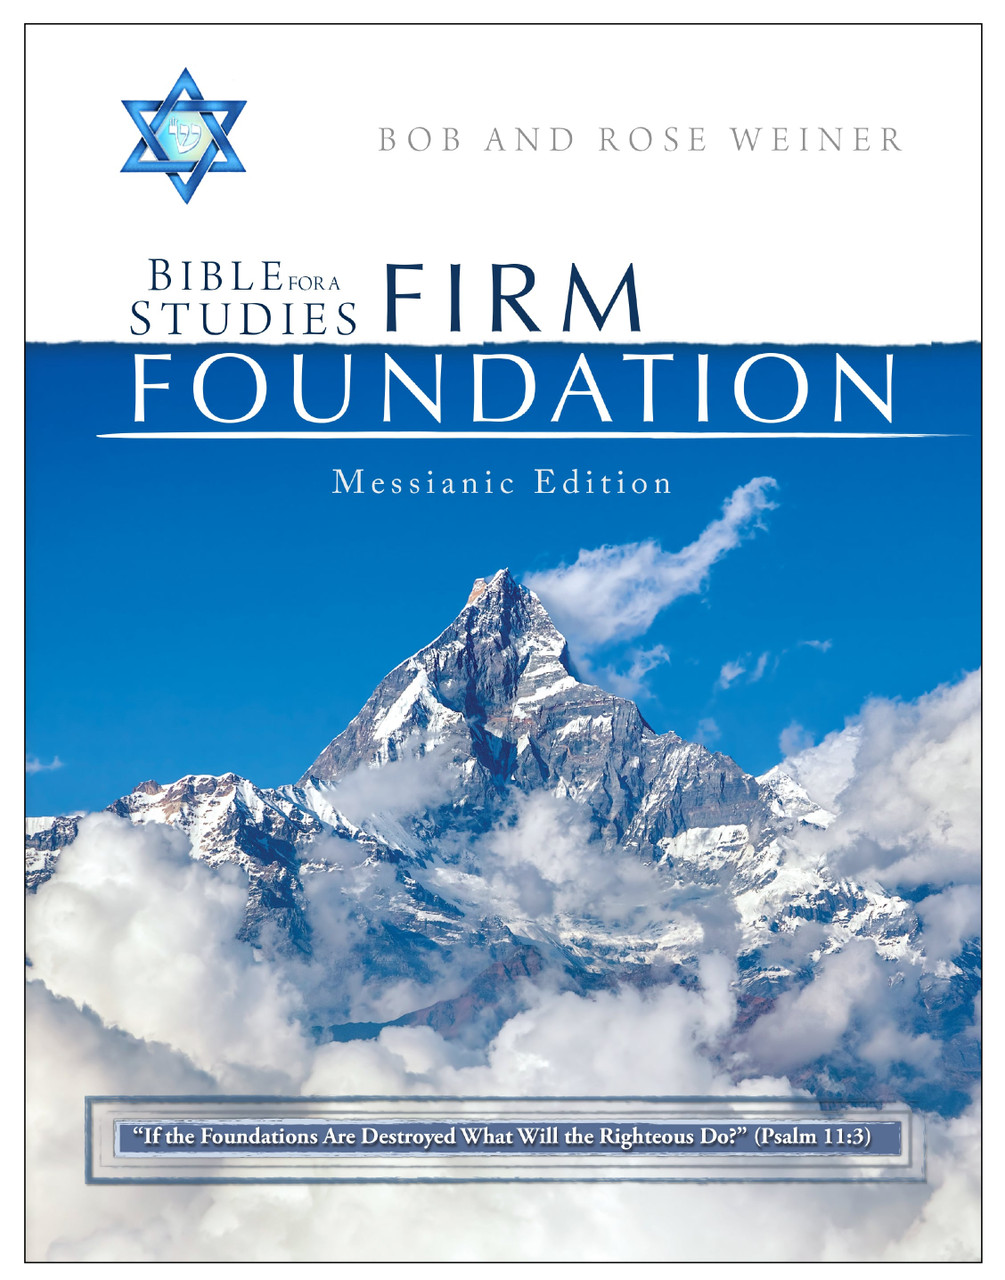 Bible Studies for a Firm Foundation Messianic Edition